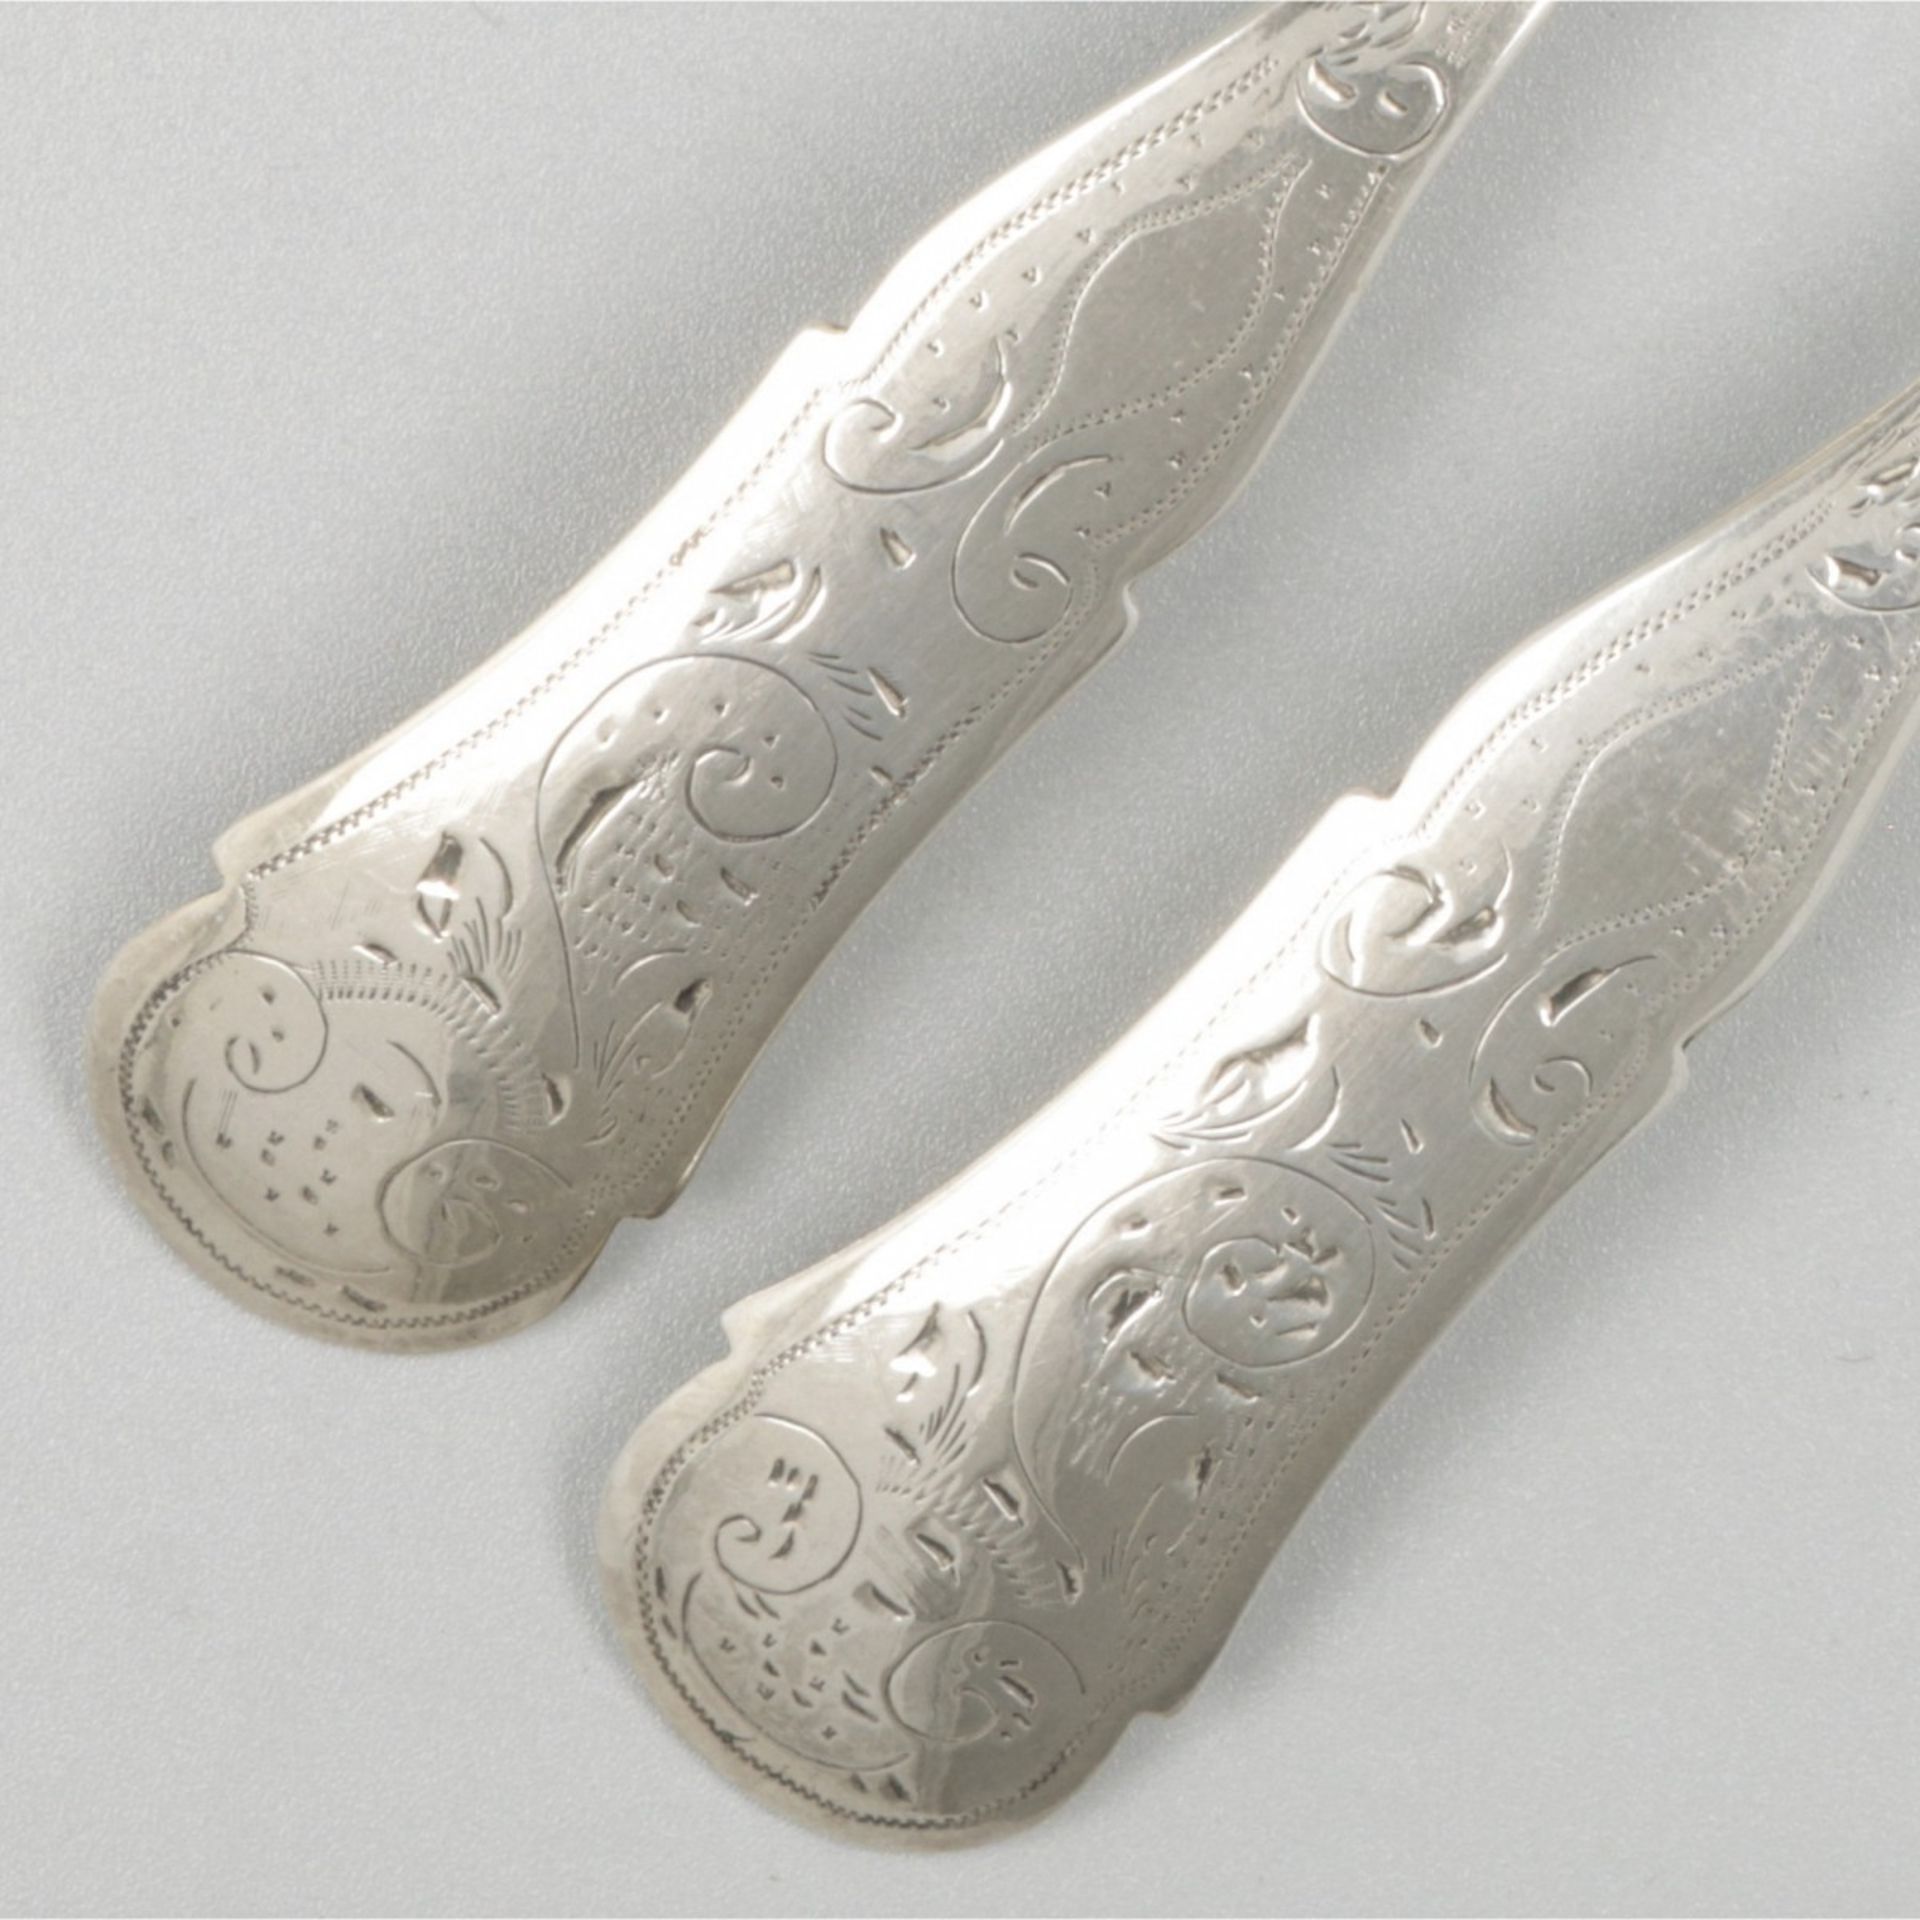 2-piece set of meat forks silver. - Image 4 of 5